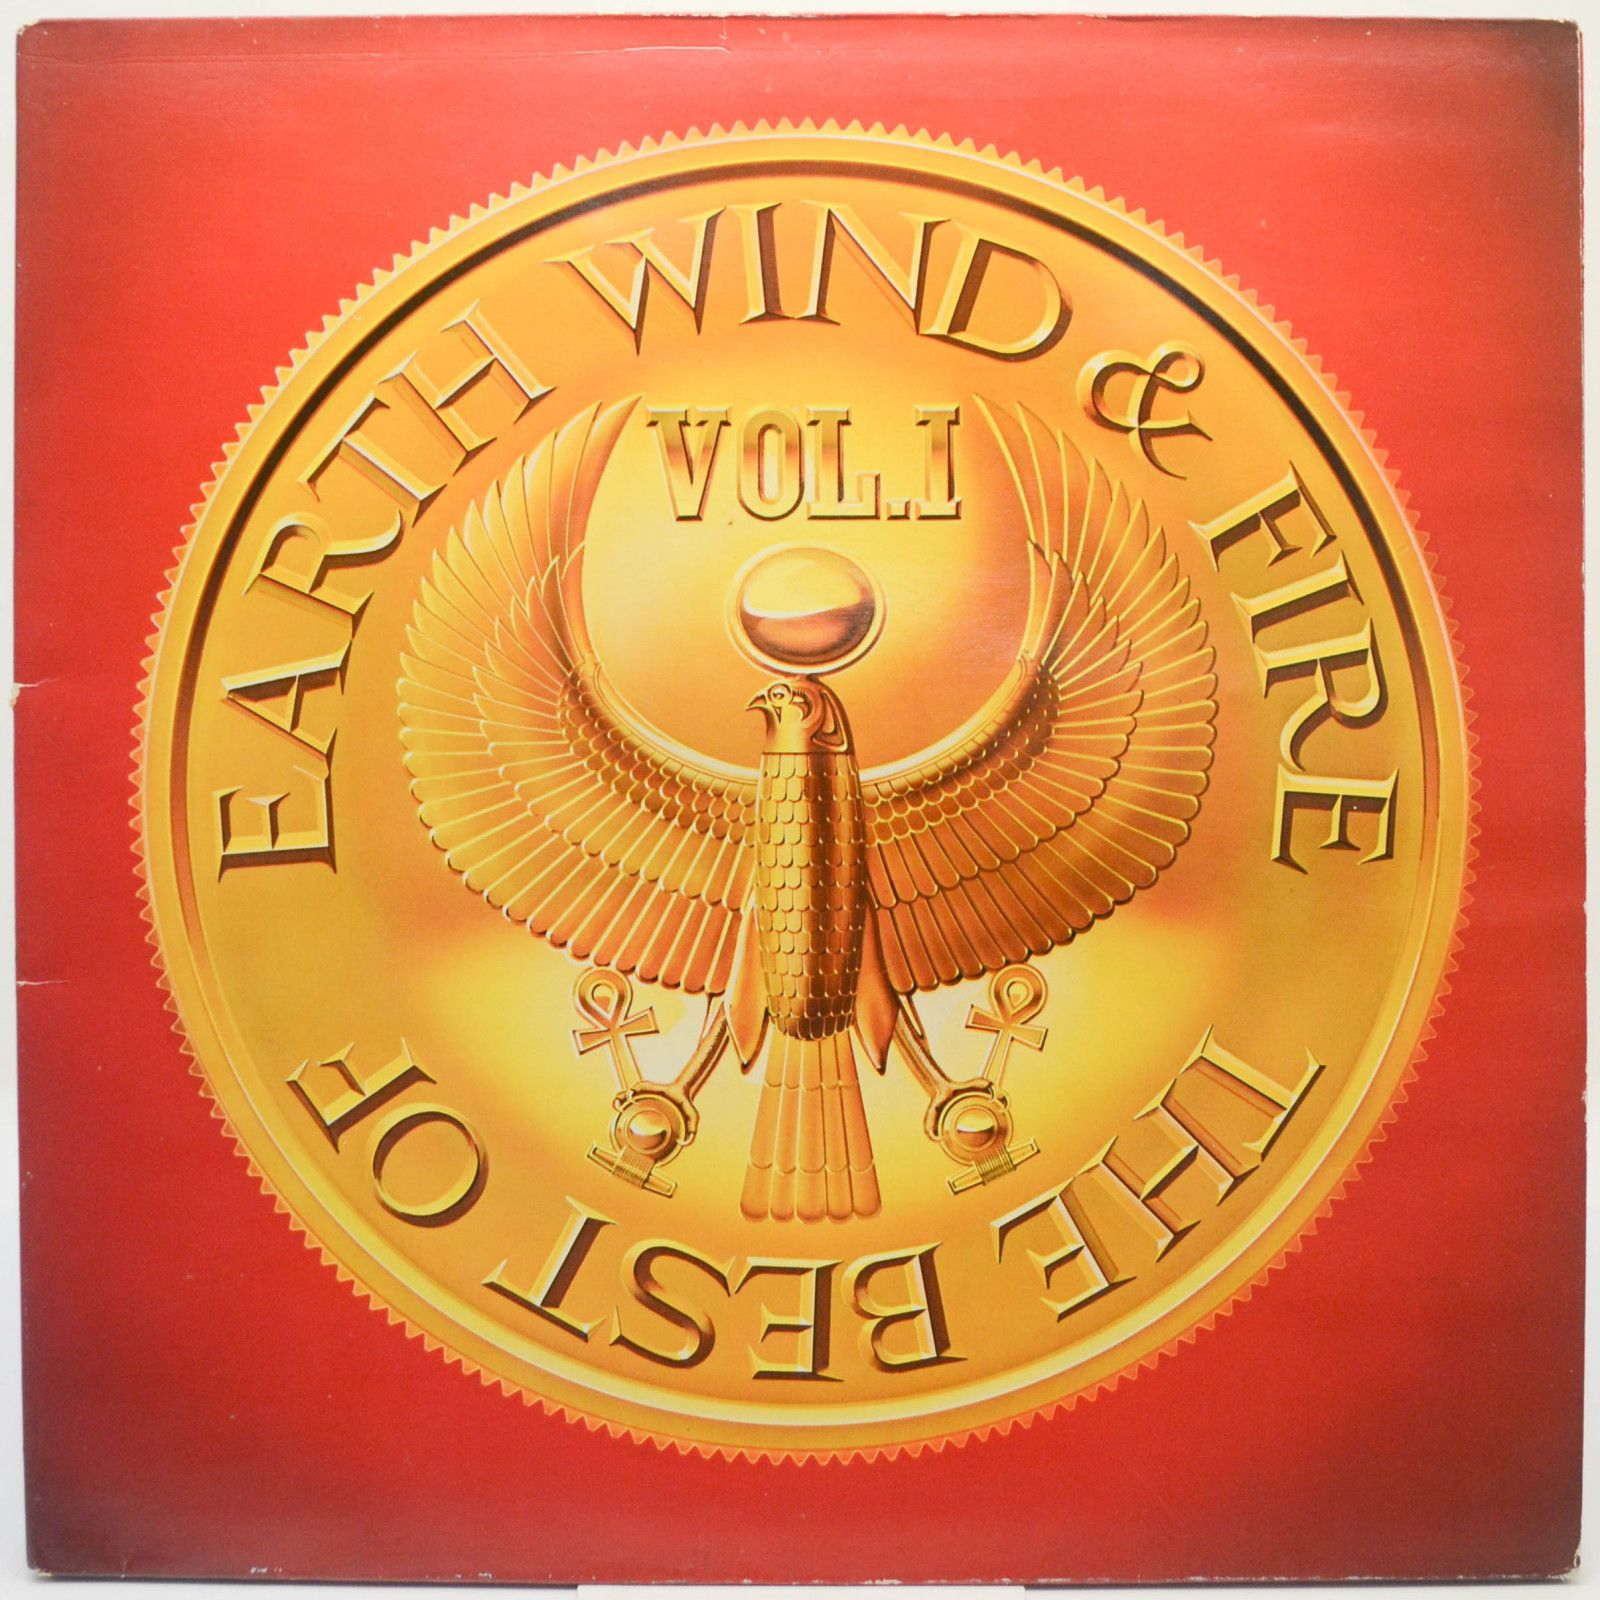 Earth, Wind & Fire — The Best Of Earth Wind & Fire Vol. I, 1978